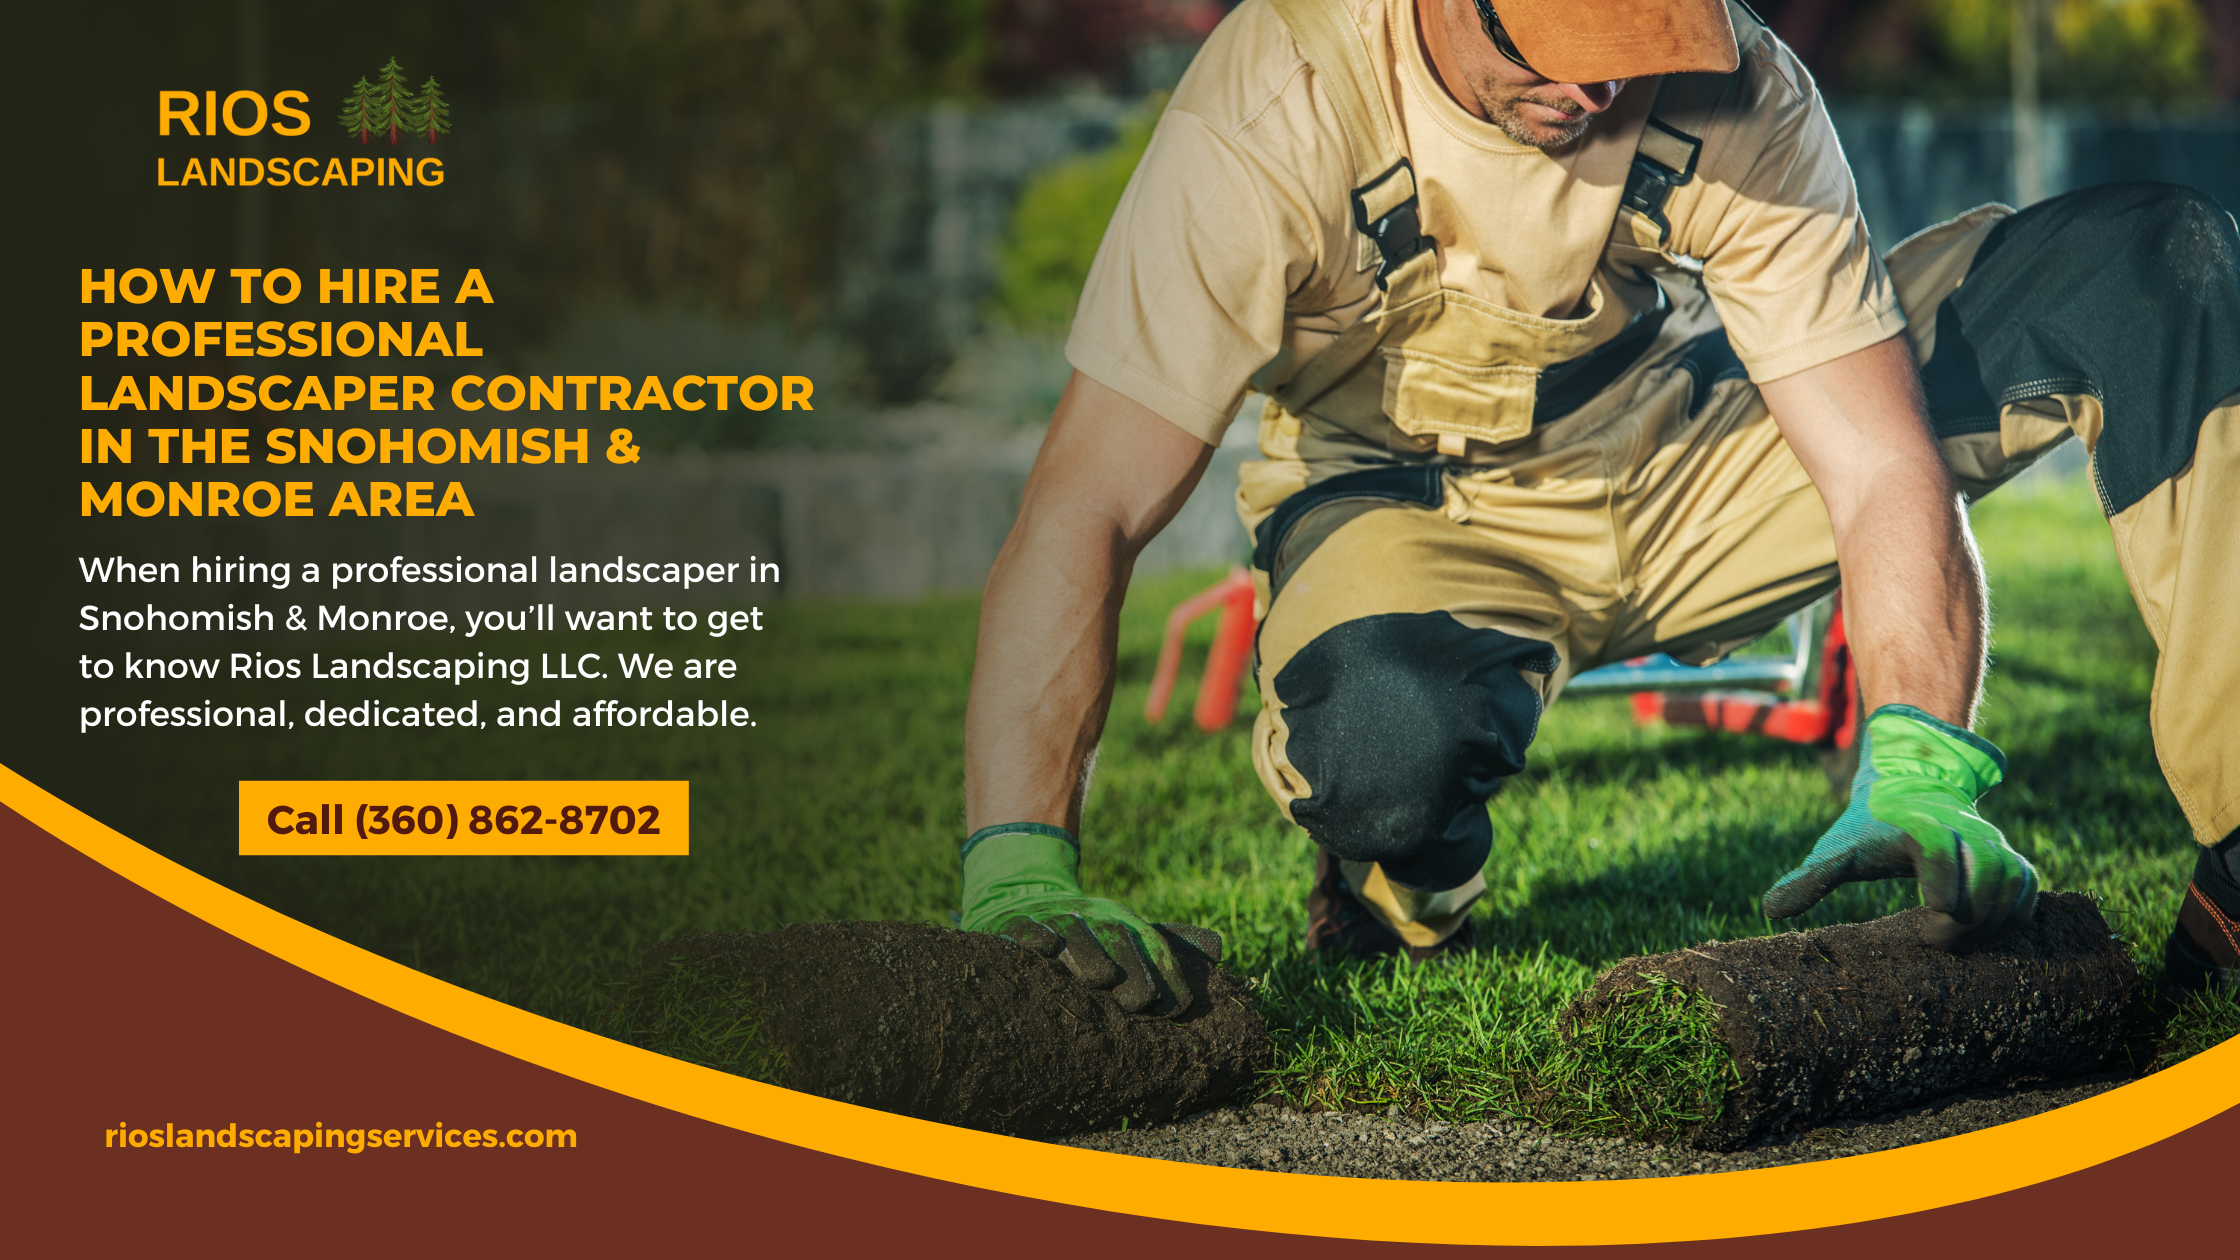 How to Hire A Professional Landscaper Contractor in the Snohomish & Monroe Area